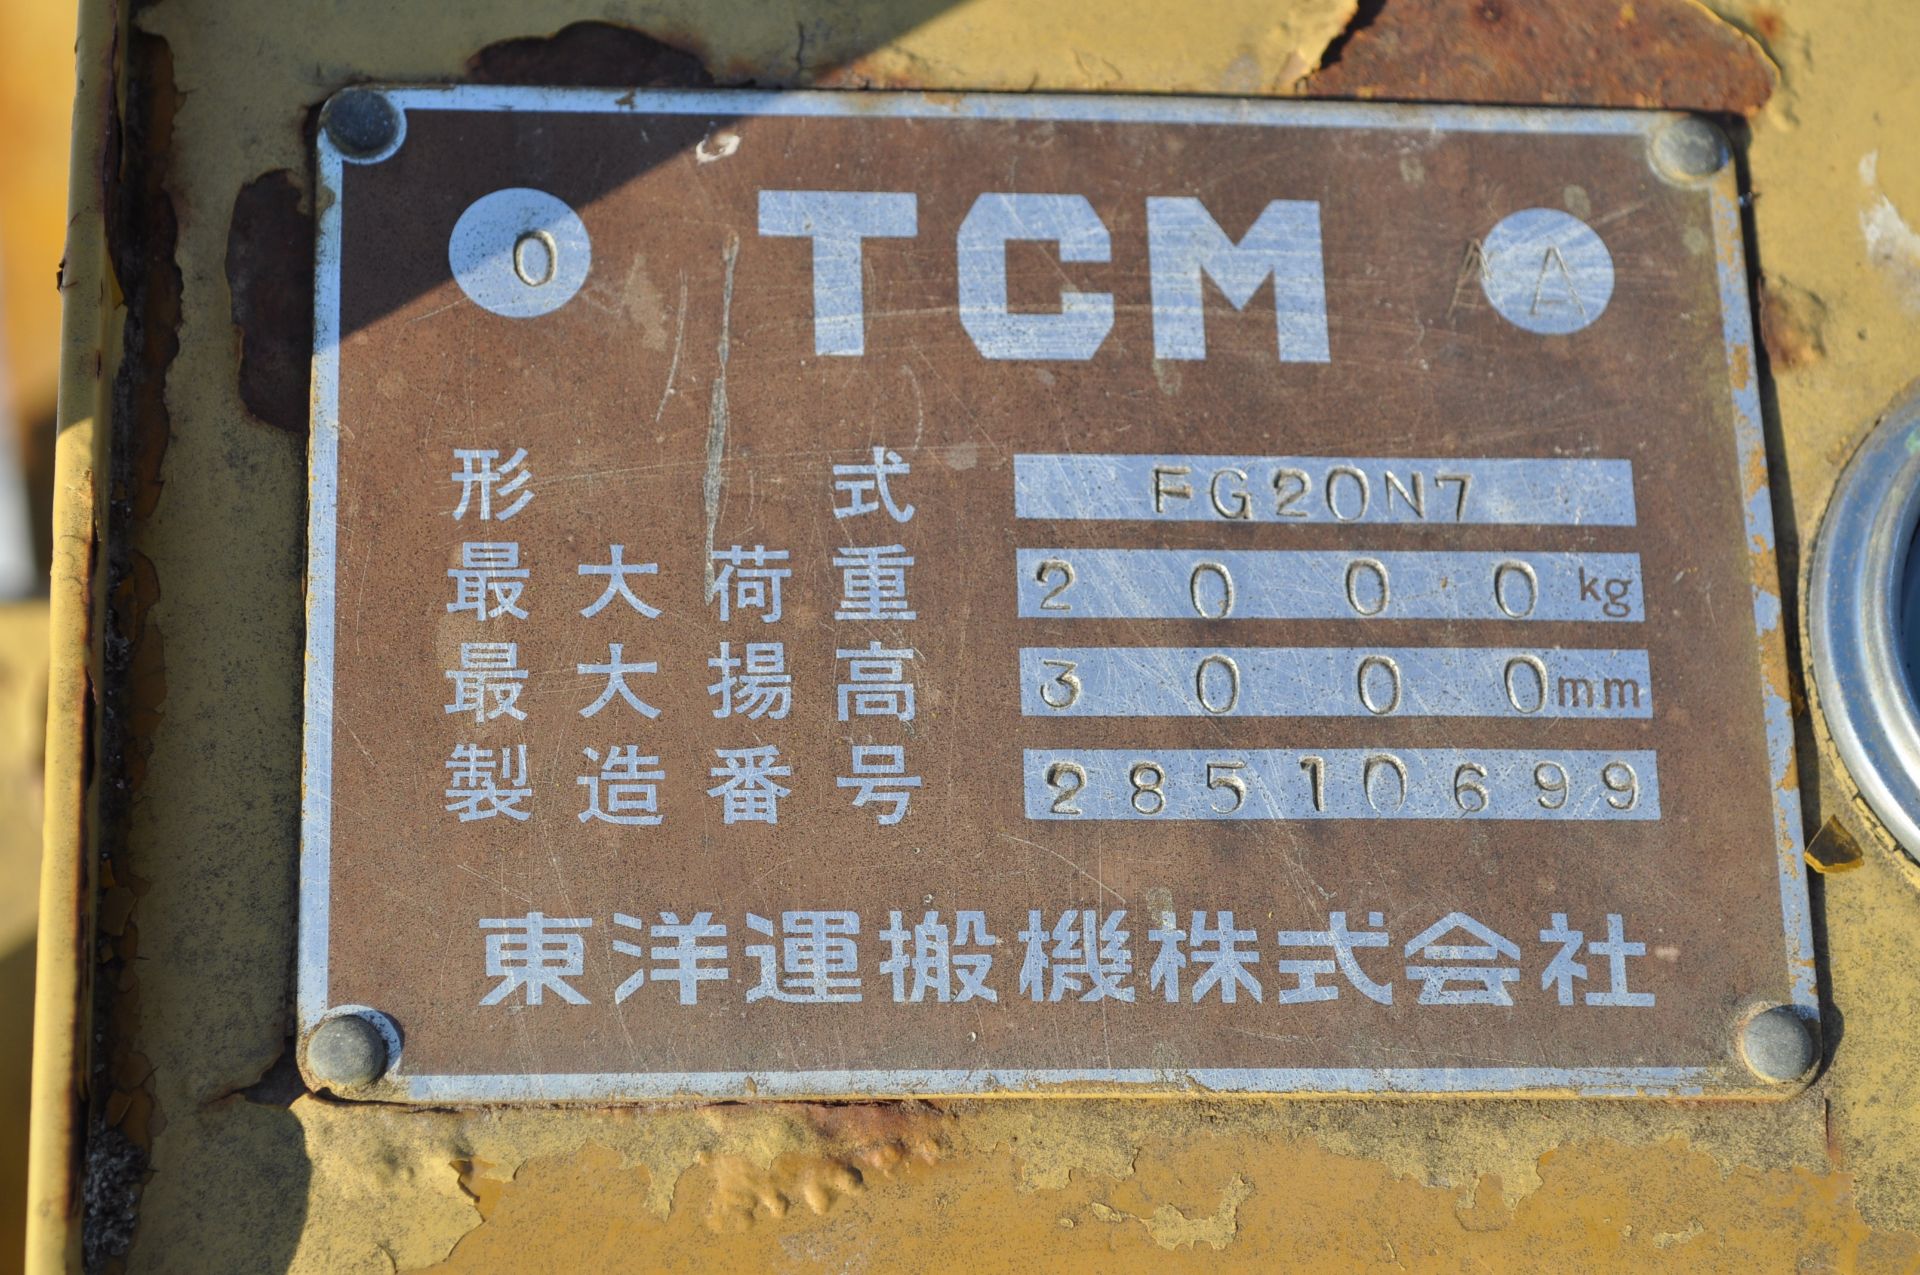 TCM forklift, gasoline, 7.00-12 front duals, 6.90/6.00-9 rear, 2 stage mast, NON-RUNNING - Image 12 of 12